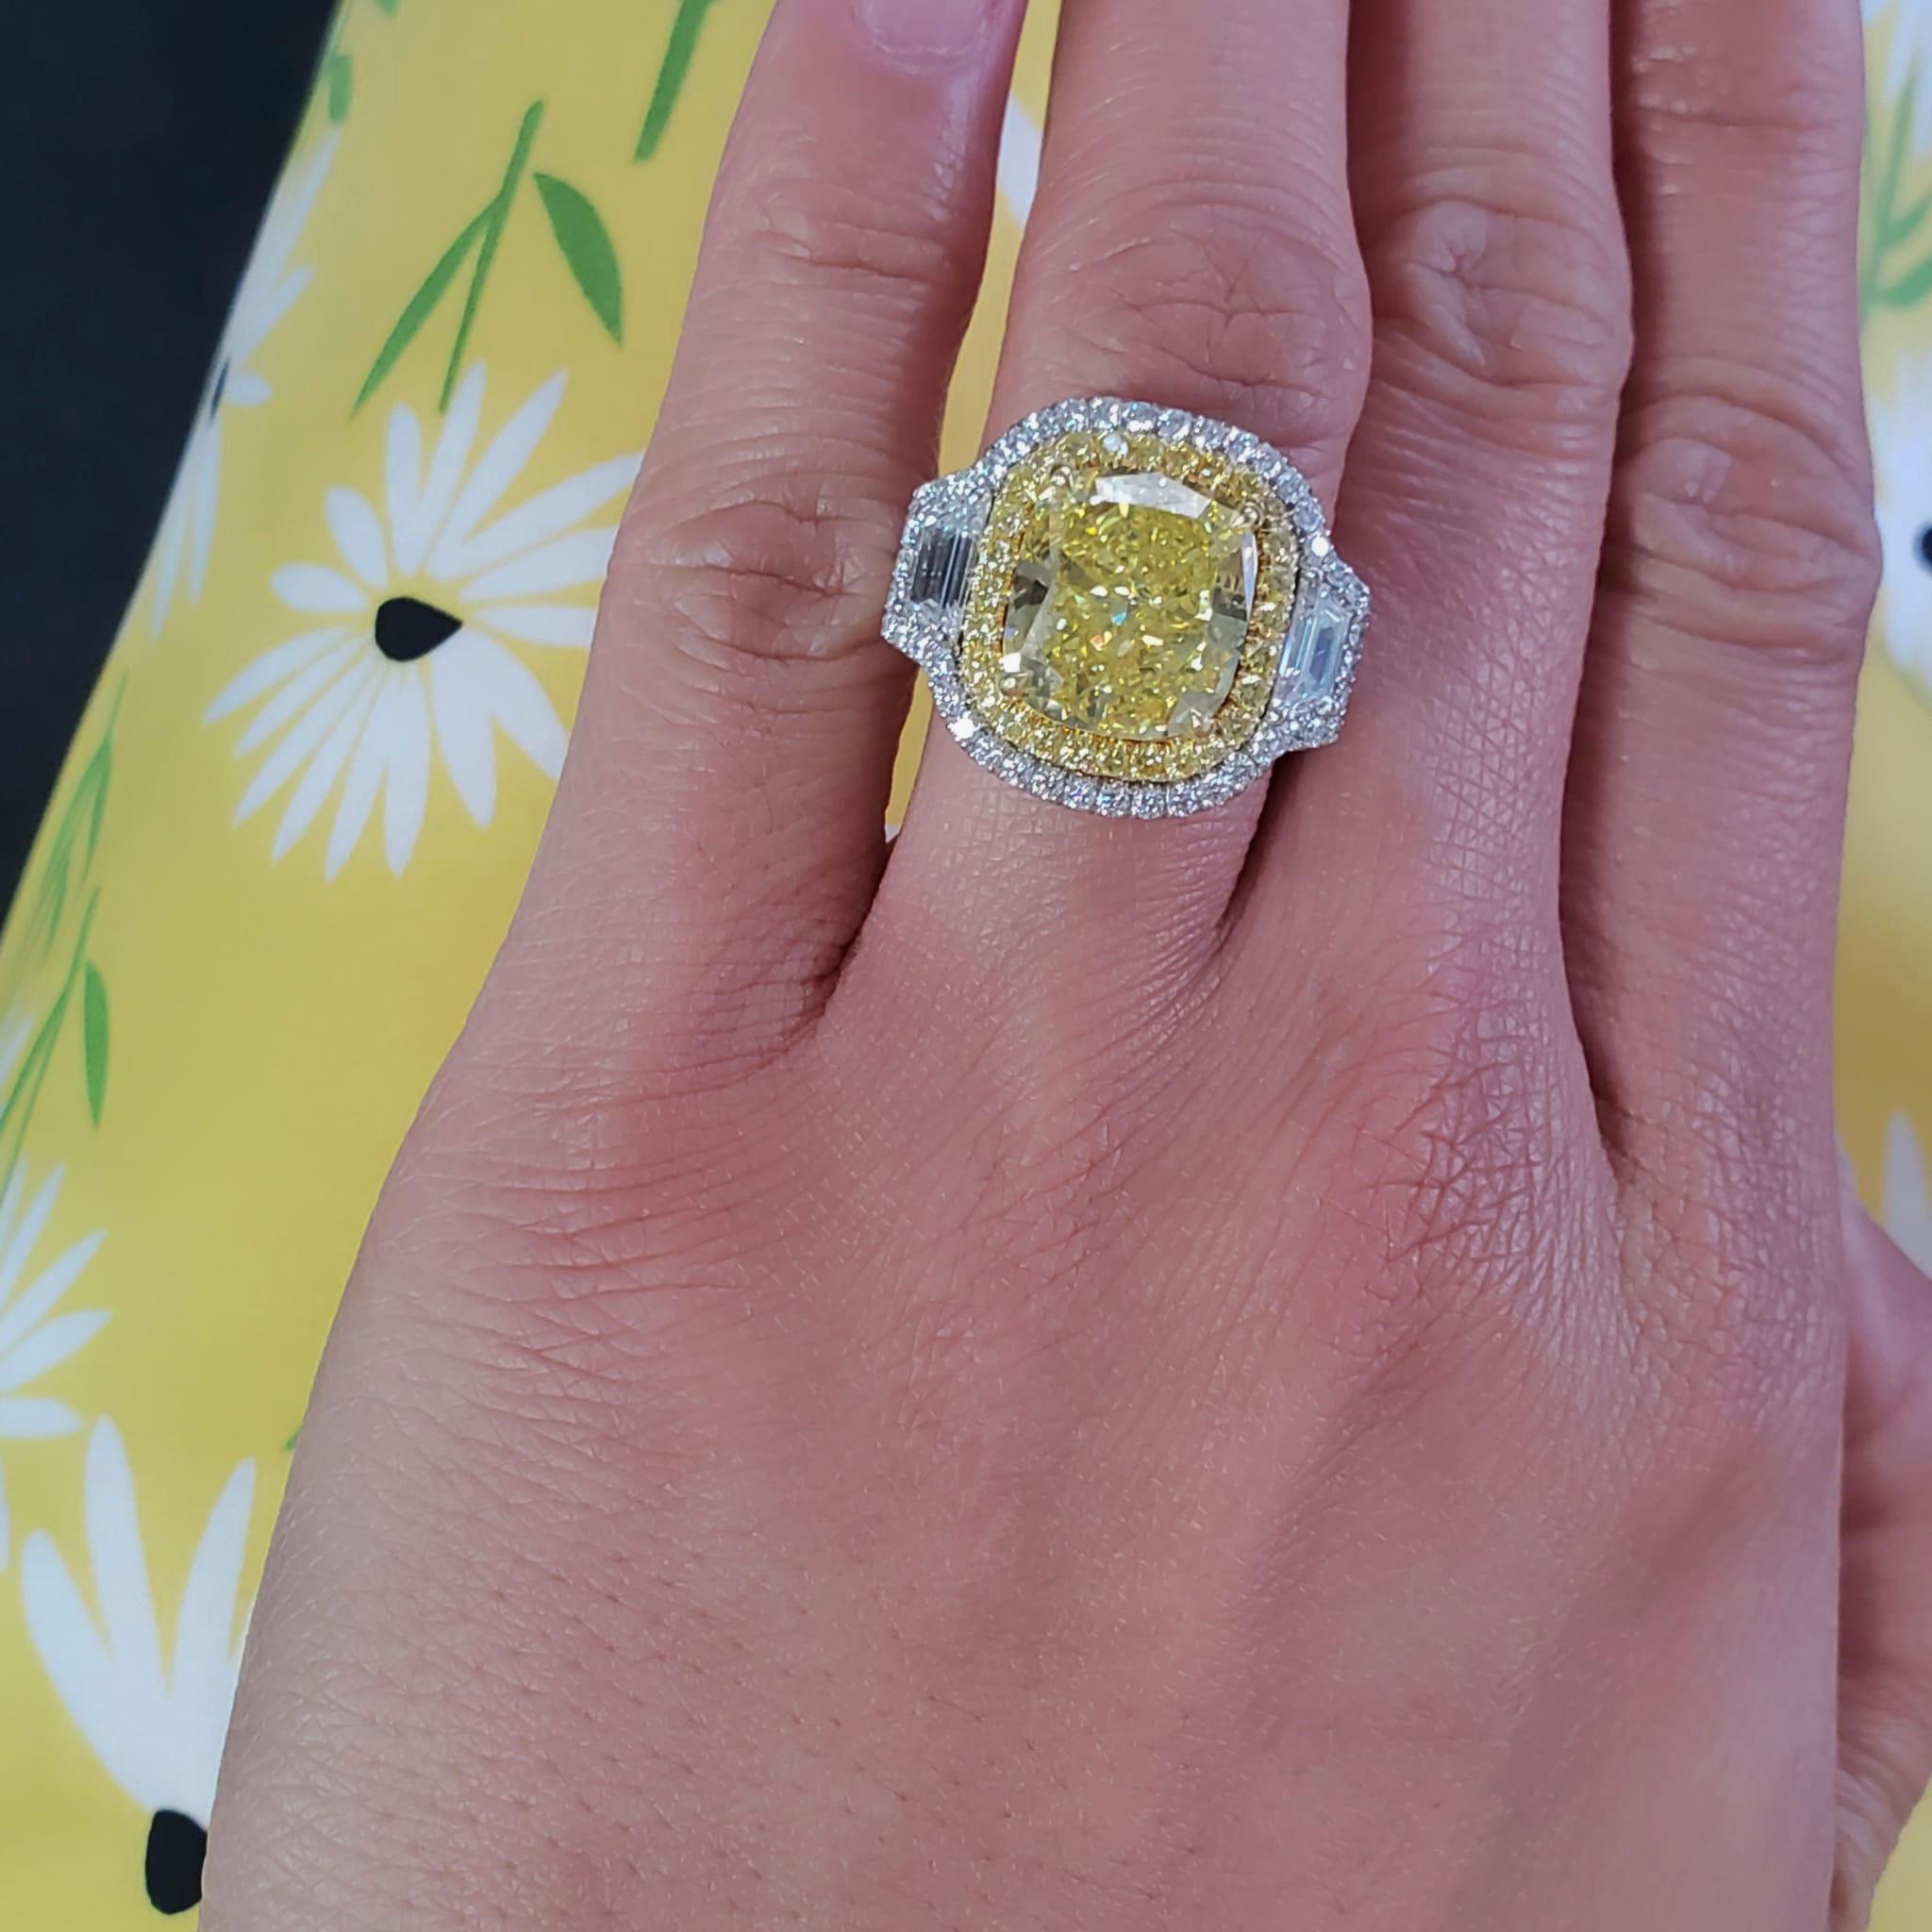 A Magnificent Platinum & 18k Ring,  GIA Certified Cushion Shaped Centerstone Diamond,  7.74 carat Natural Fancy Vivid Yellow (Canary). The clarity grade is SI1 (pleasant inclusion) with medium blue fluorescence. 

The stone measures